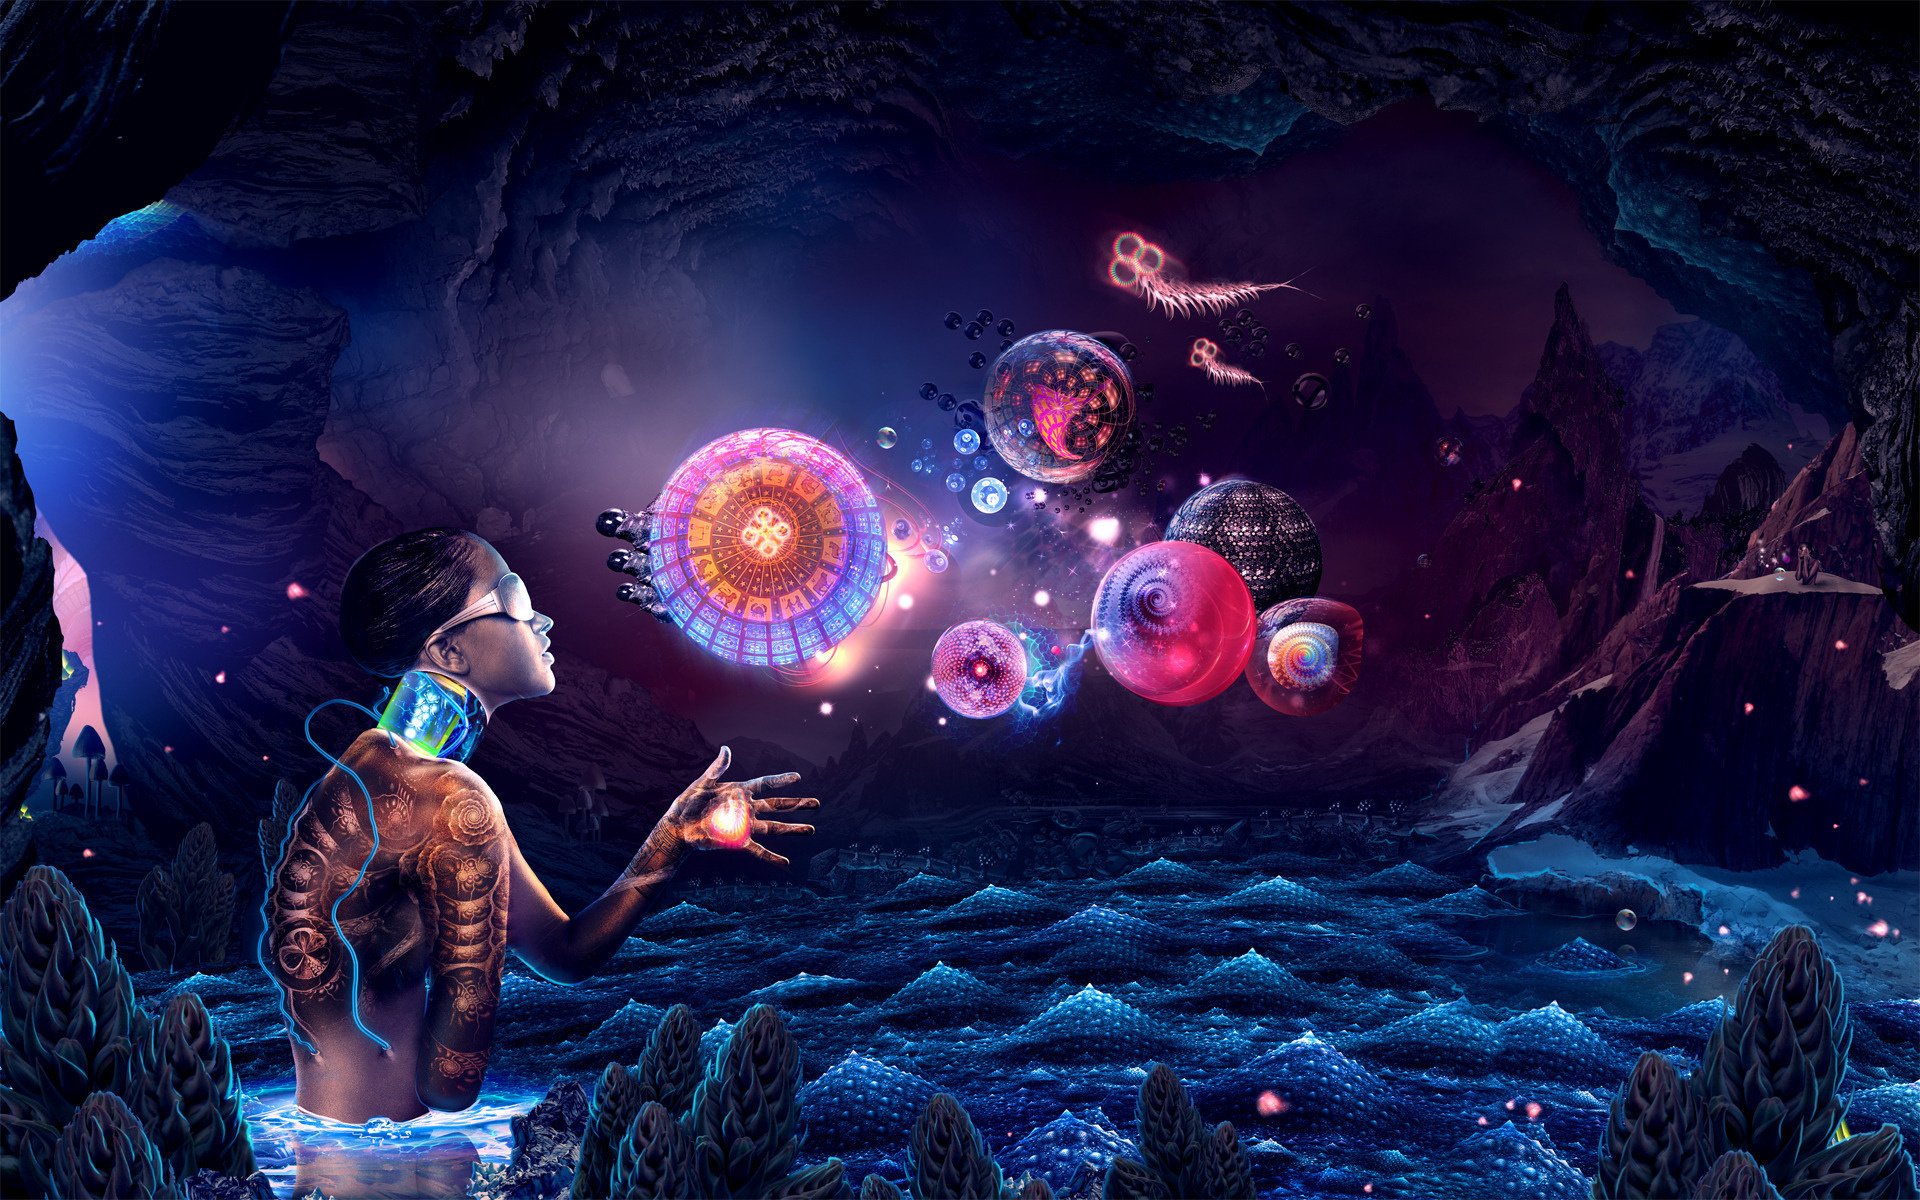 glasses, Ocean, Creatures, Girl, Intelligence, Psychedelic, Robot, Cyborg W...